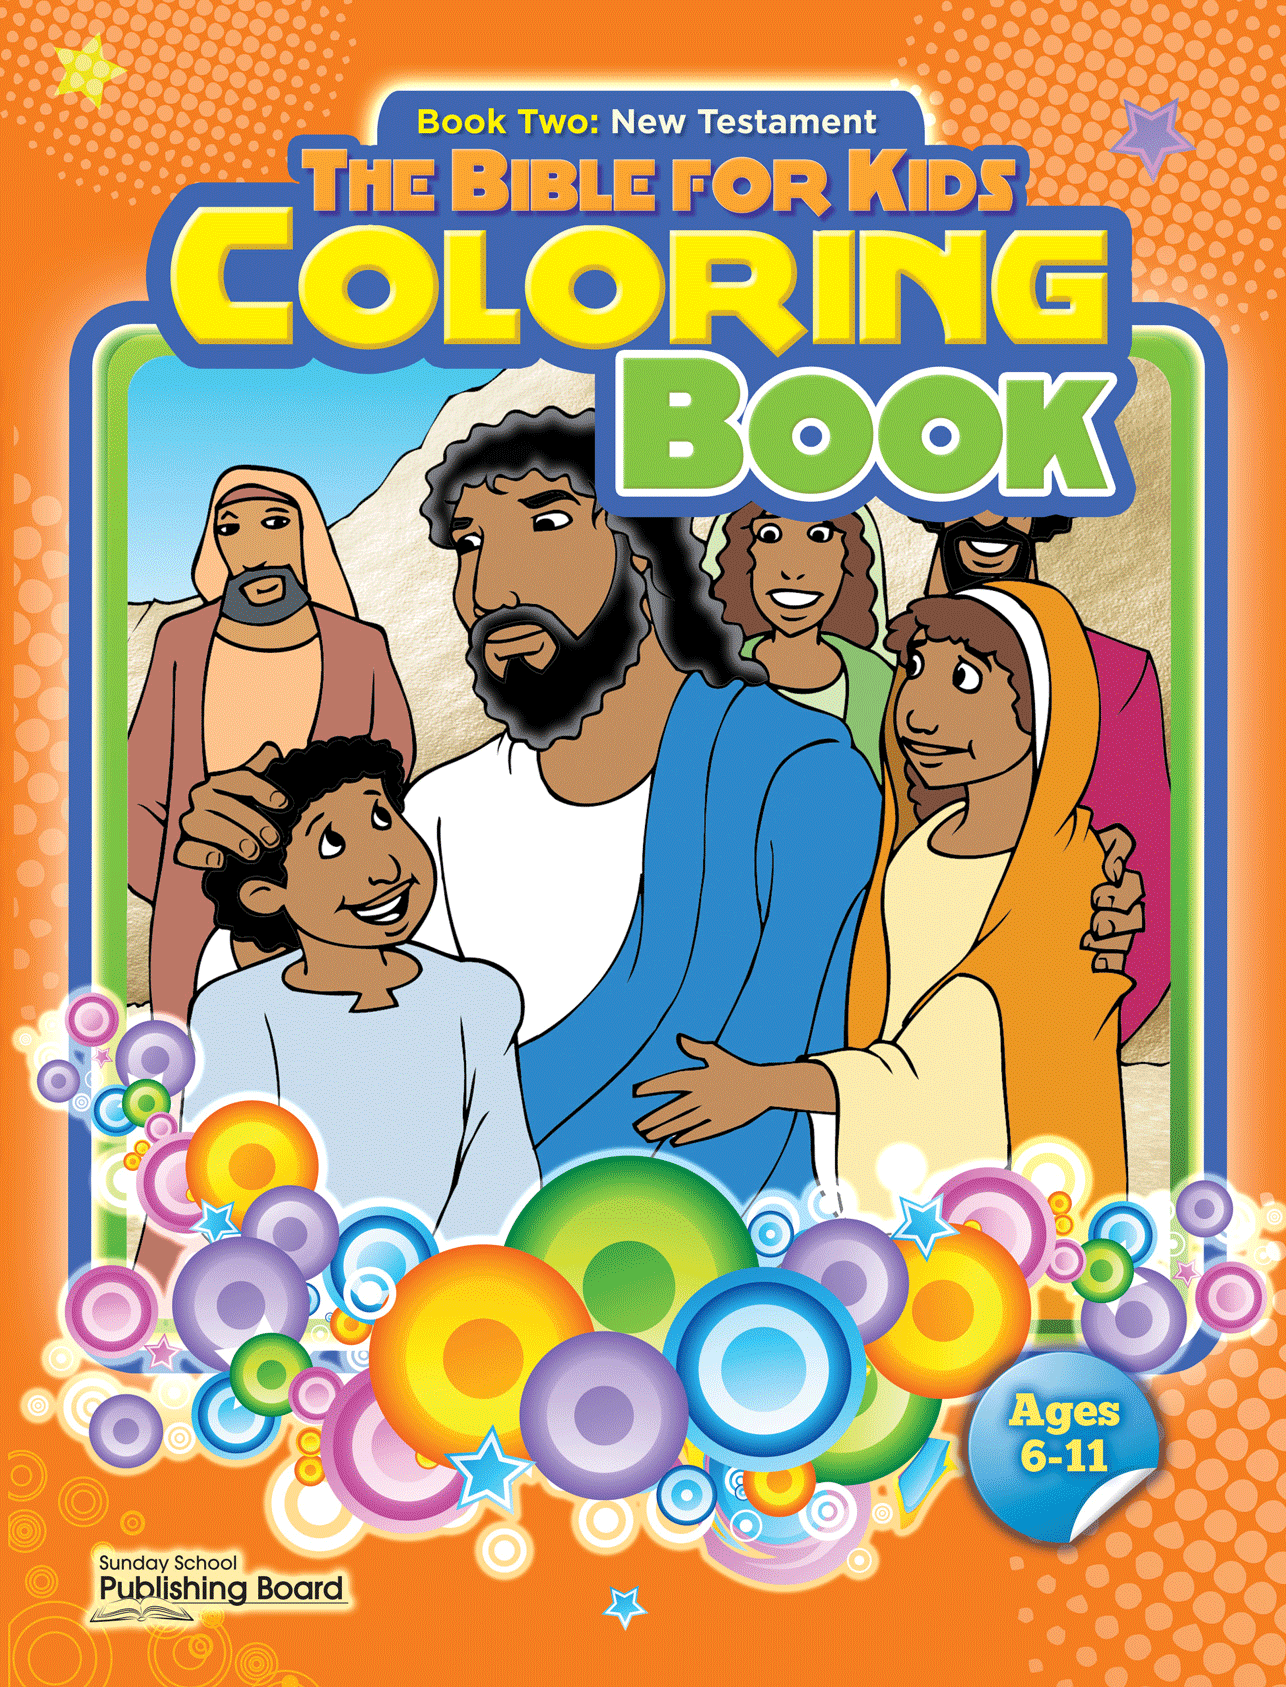 The Bible for Kids Coloring Book, Book Two: New Testament